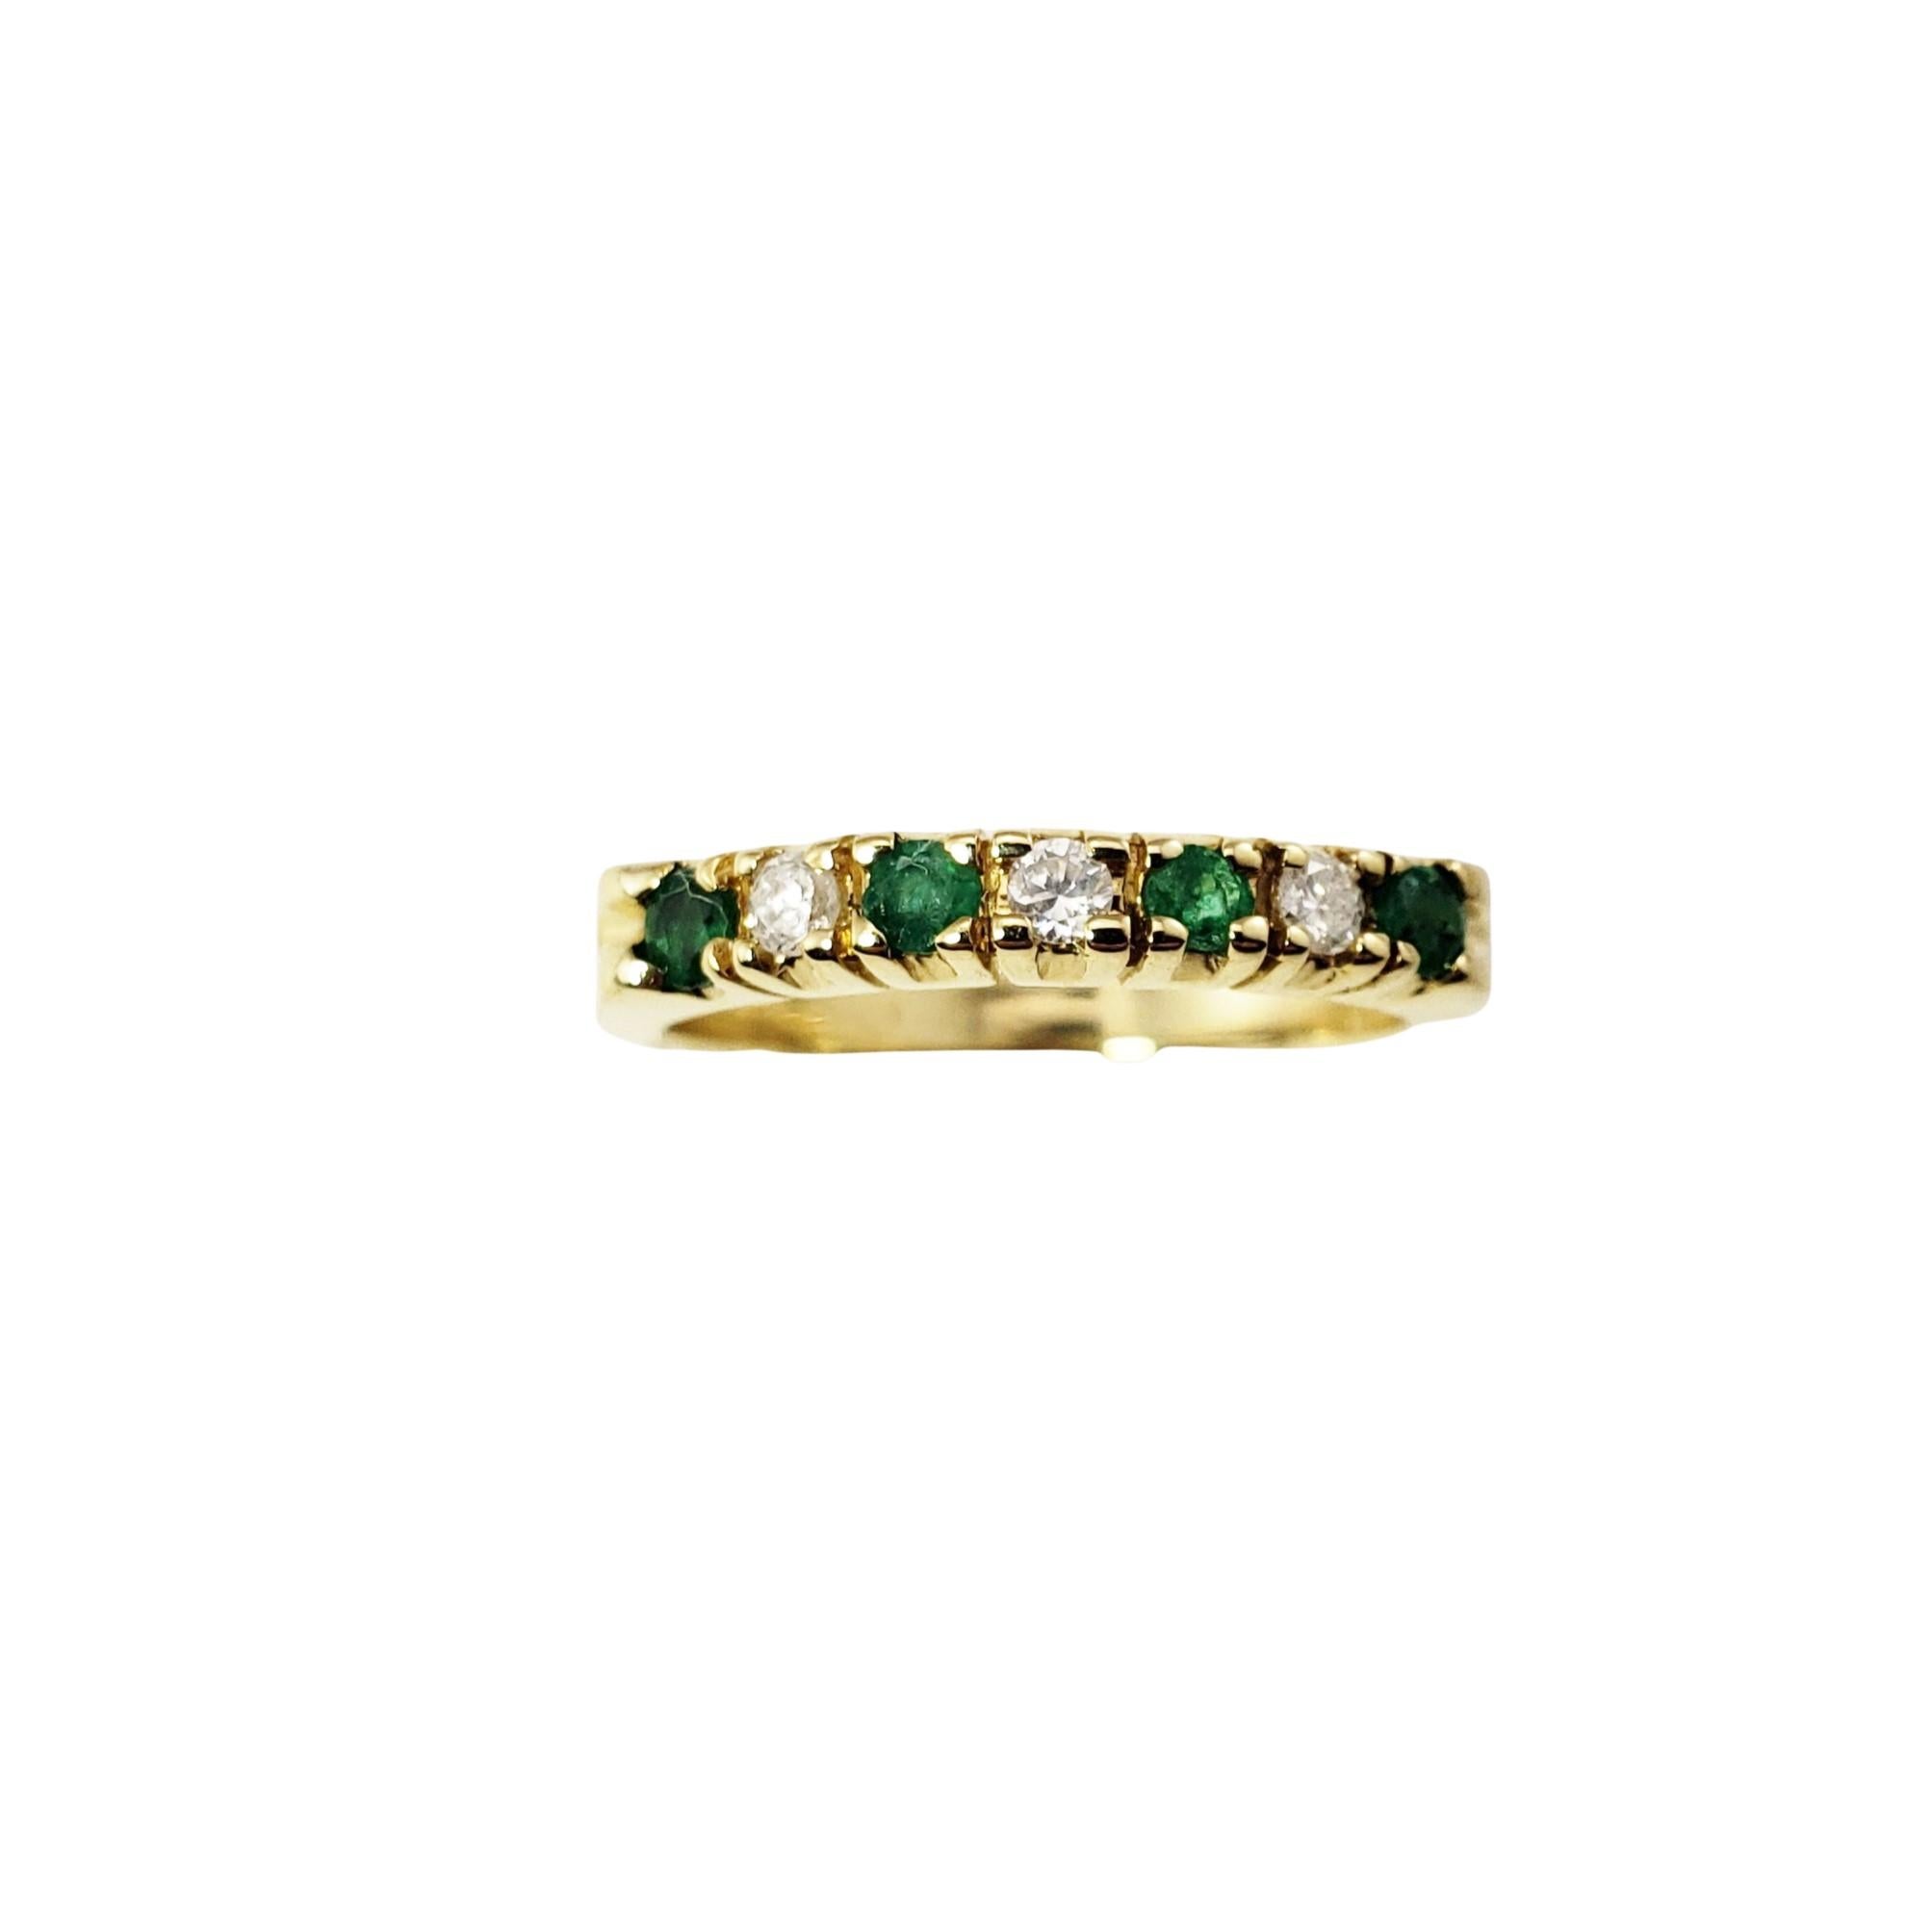 14 Karat Yellow Gold Emerald and Diamond Band Ring Size 6.5-

This lovely band features three round brilliant cut diamonds and four round emeralds set in classic 14K yellow gold.  Width:  3 mm.
Shank:  2.5 mm.

Approximate total diamond weight: .15